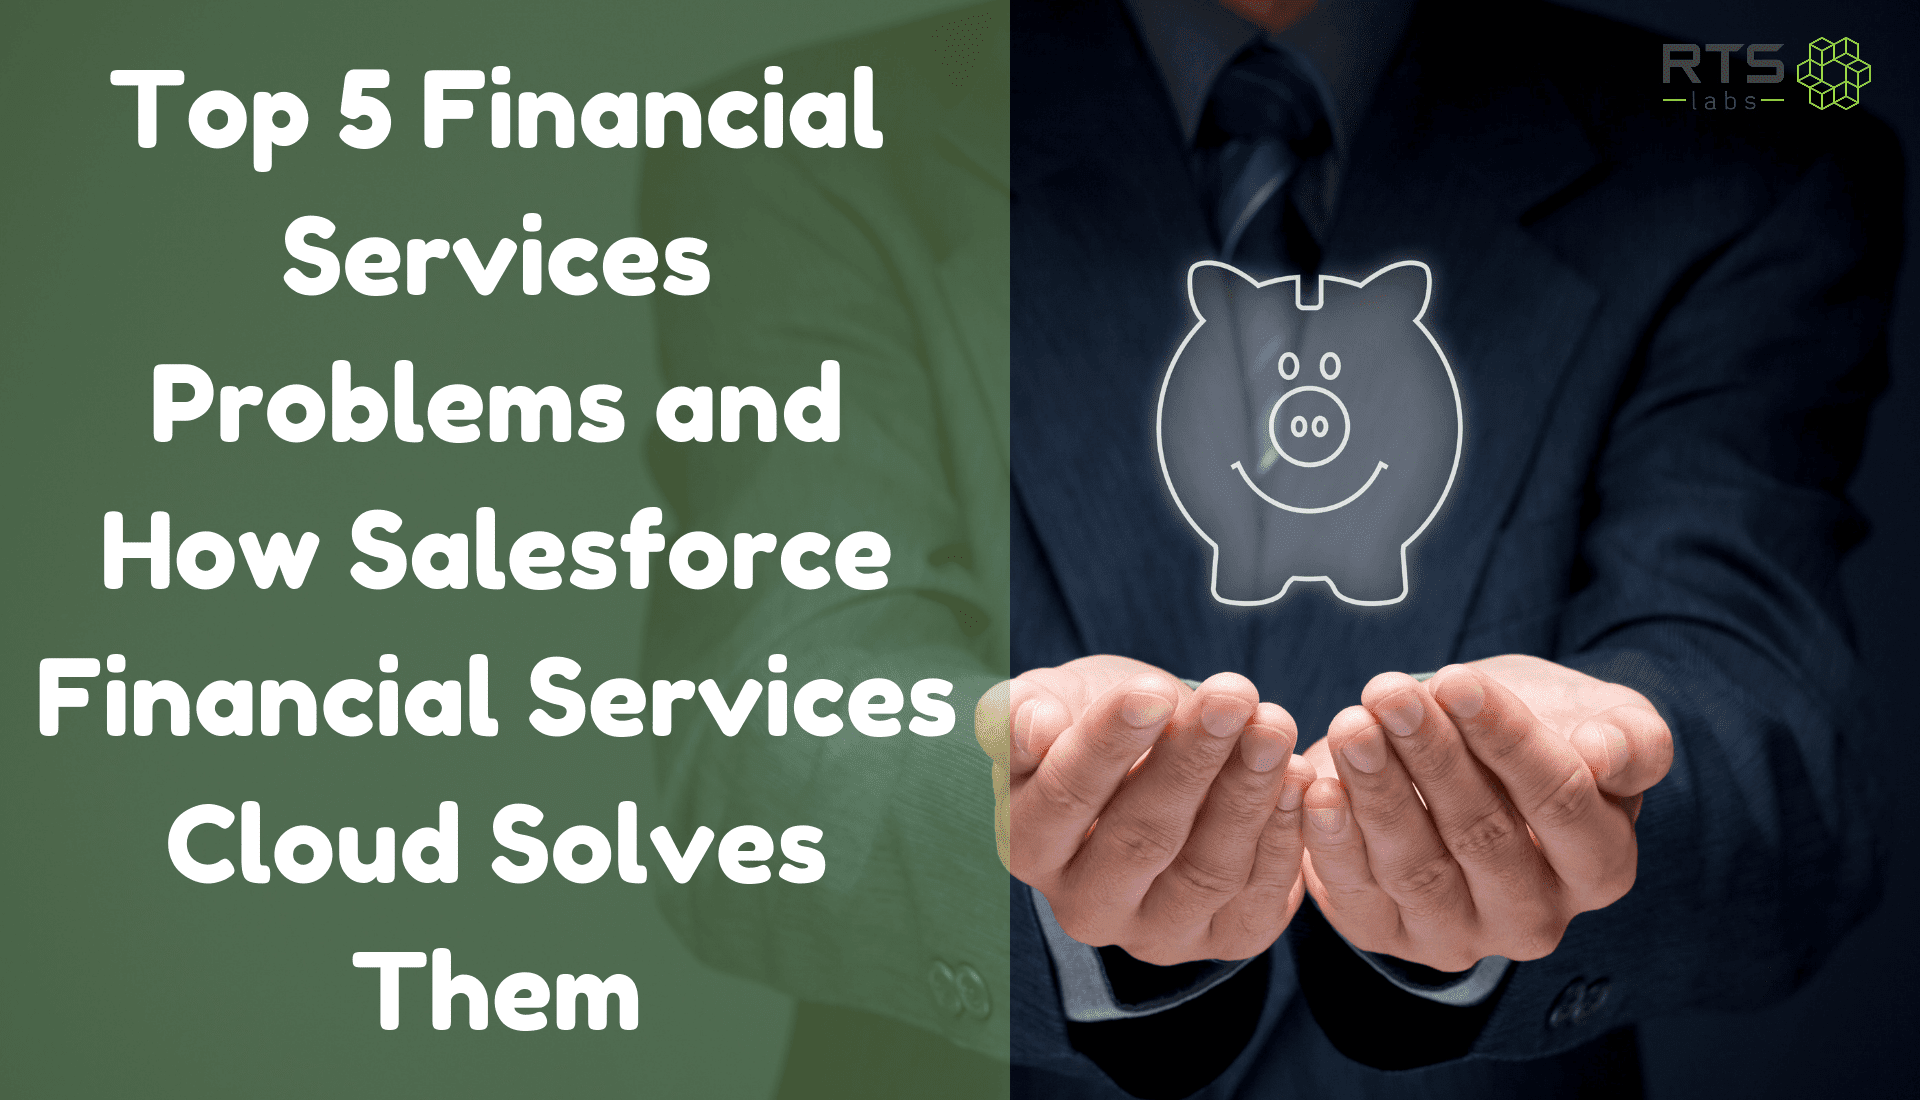 Top 5 Financial Services Problems and How Salesforce Financial Services Cloud Solves Them